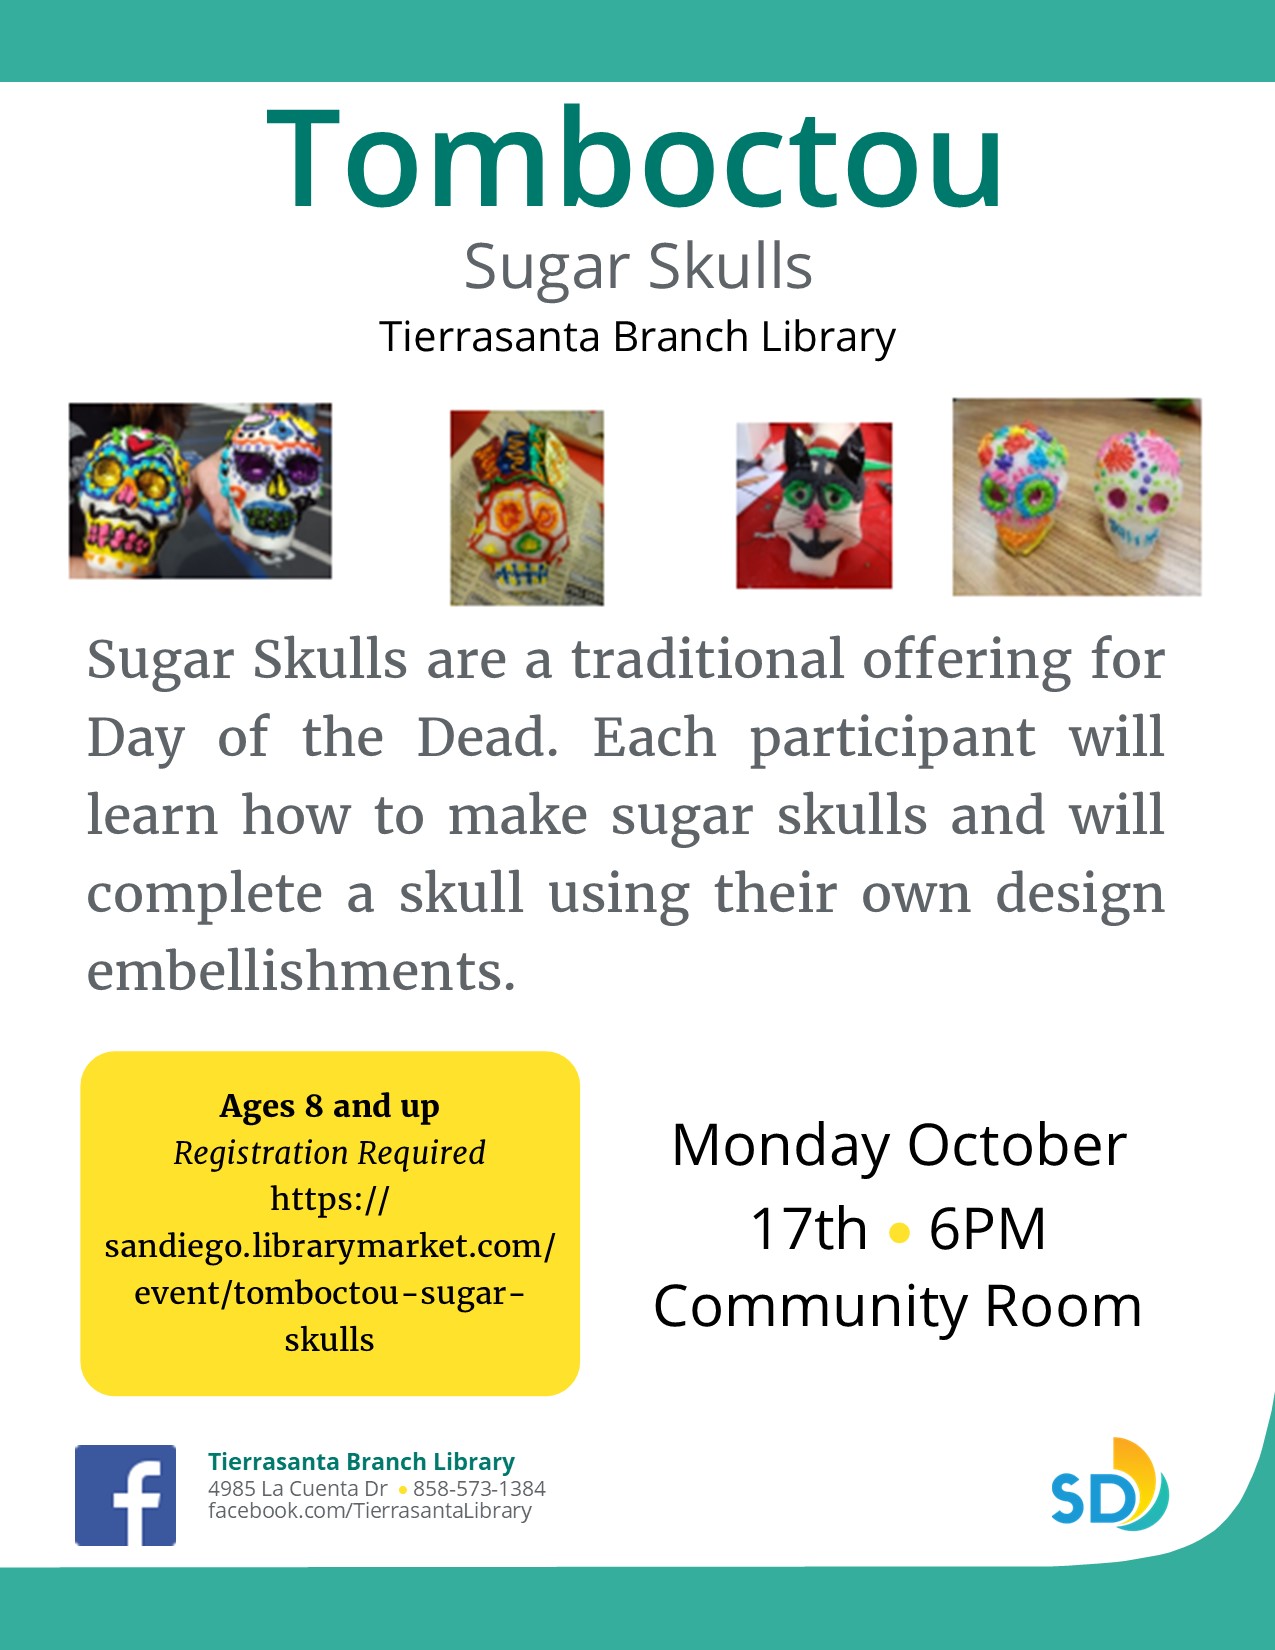 Flyer with skull-shaped sugar cubes painted for Day of the Dead